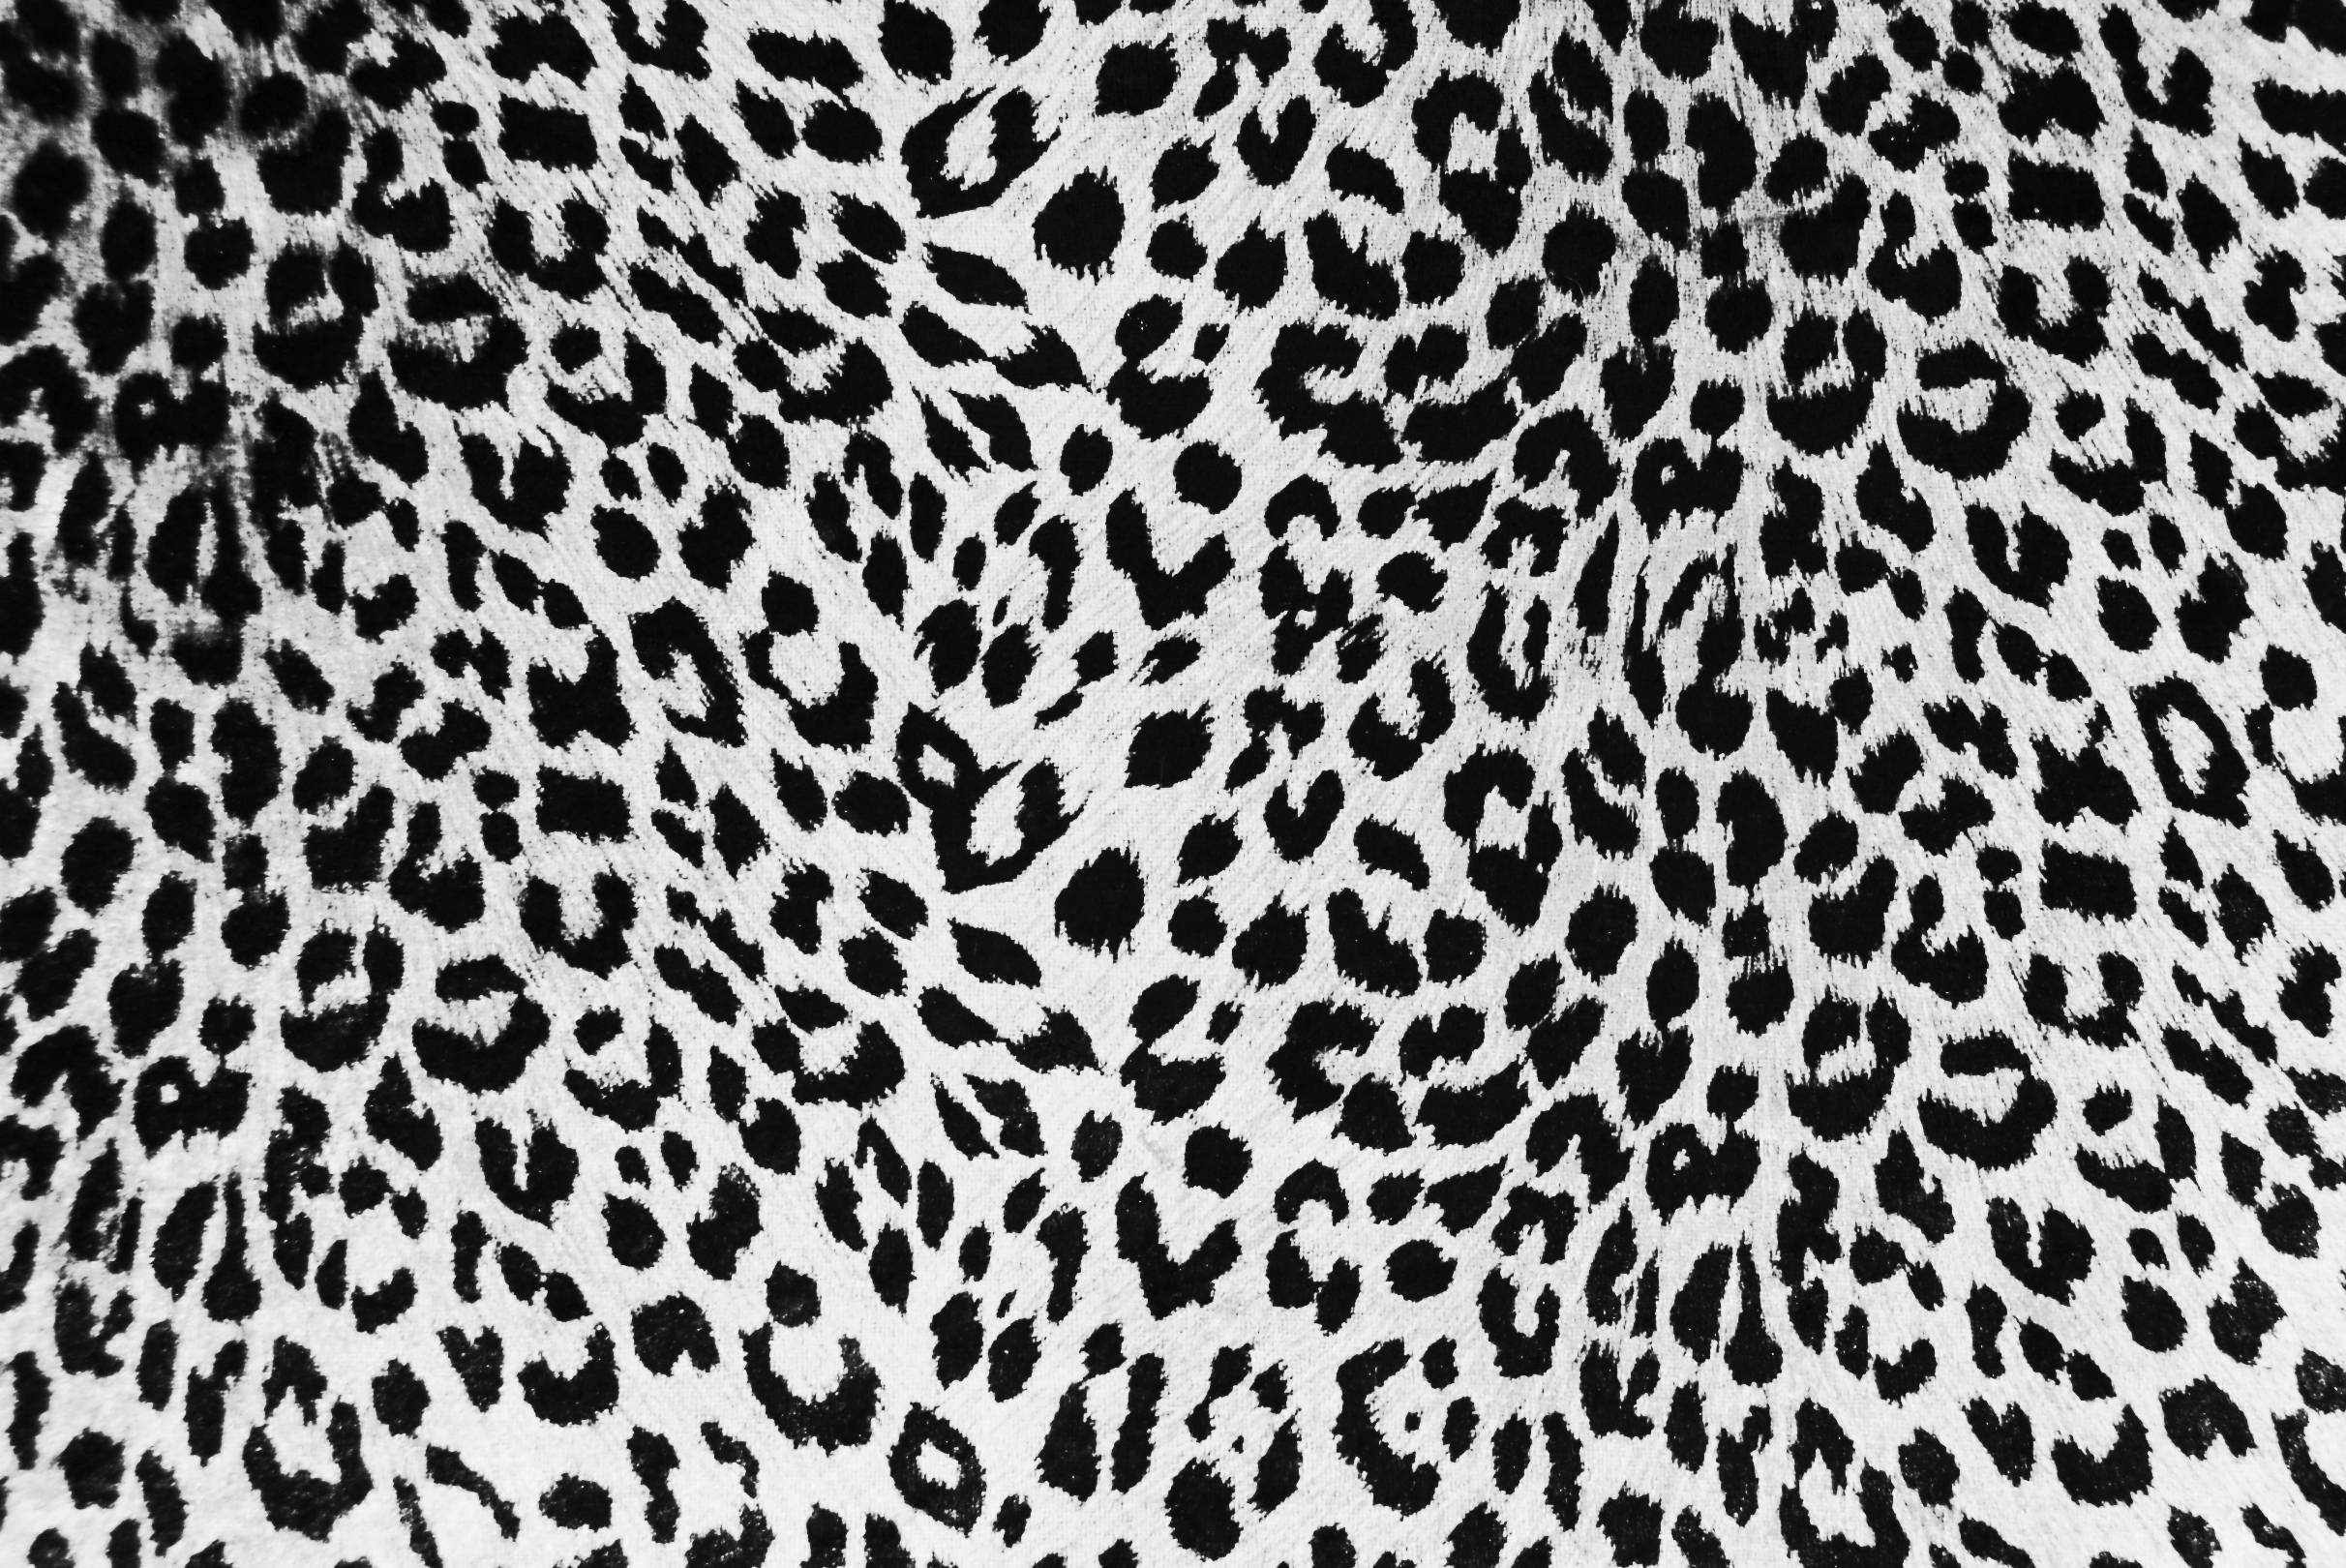 Amazing Leopard Skin Pictures & Backgrounds